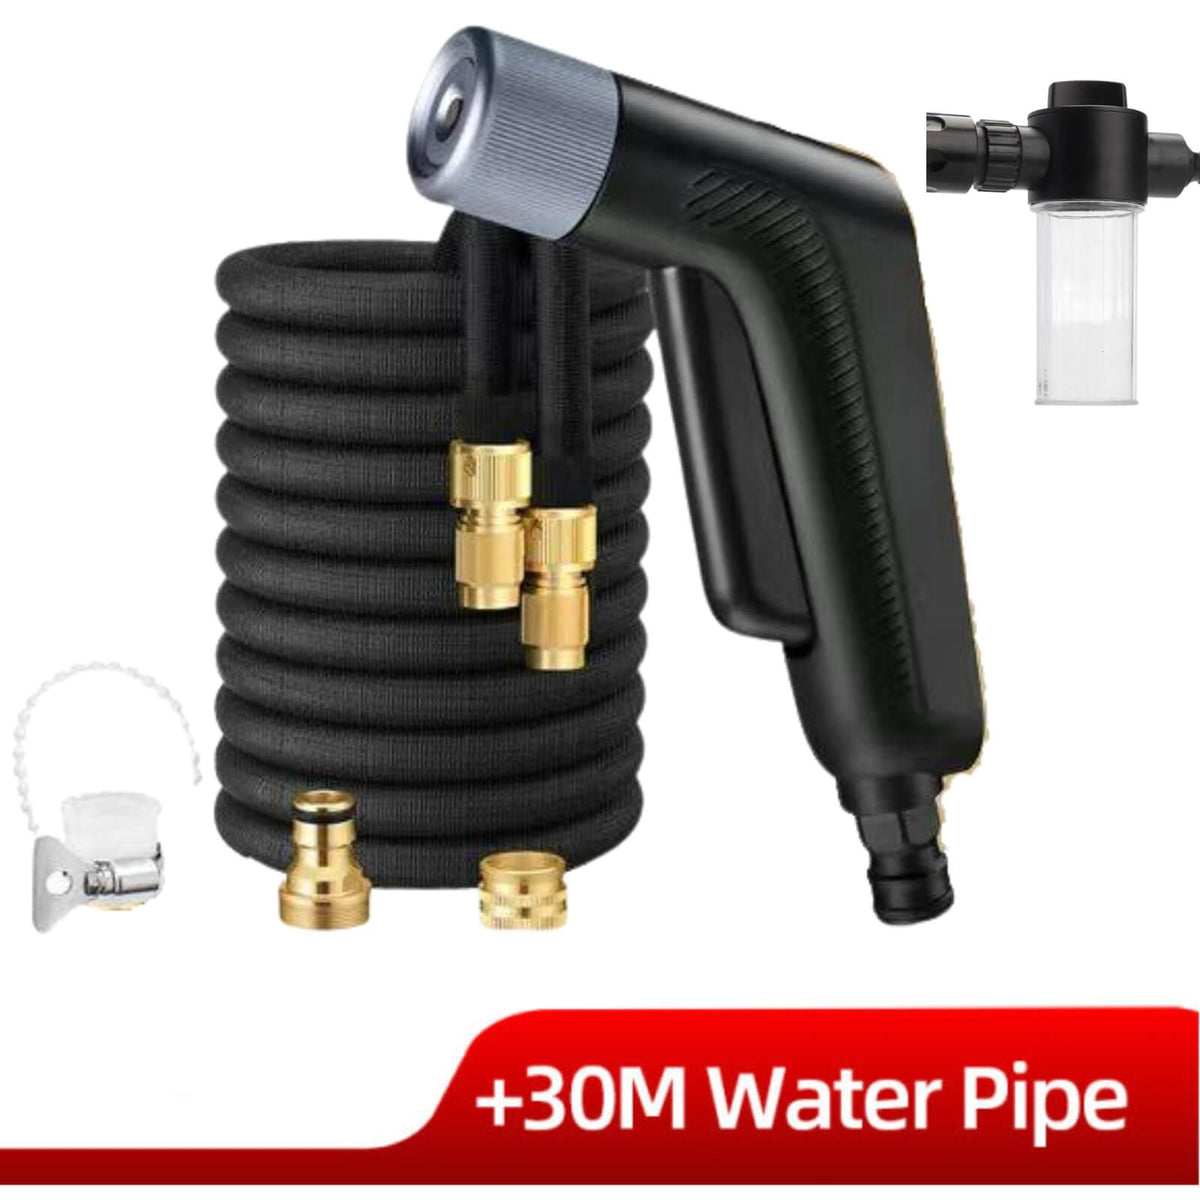 High Pressure Water Gun Up To 30m Pipes: 4 Spay Modes